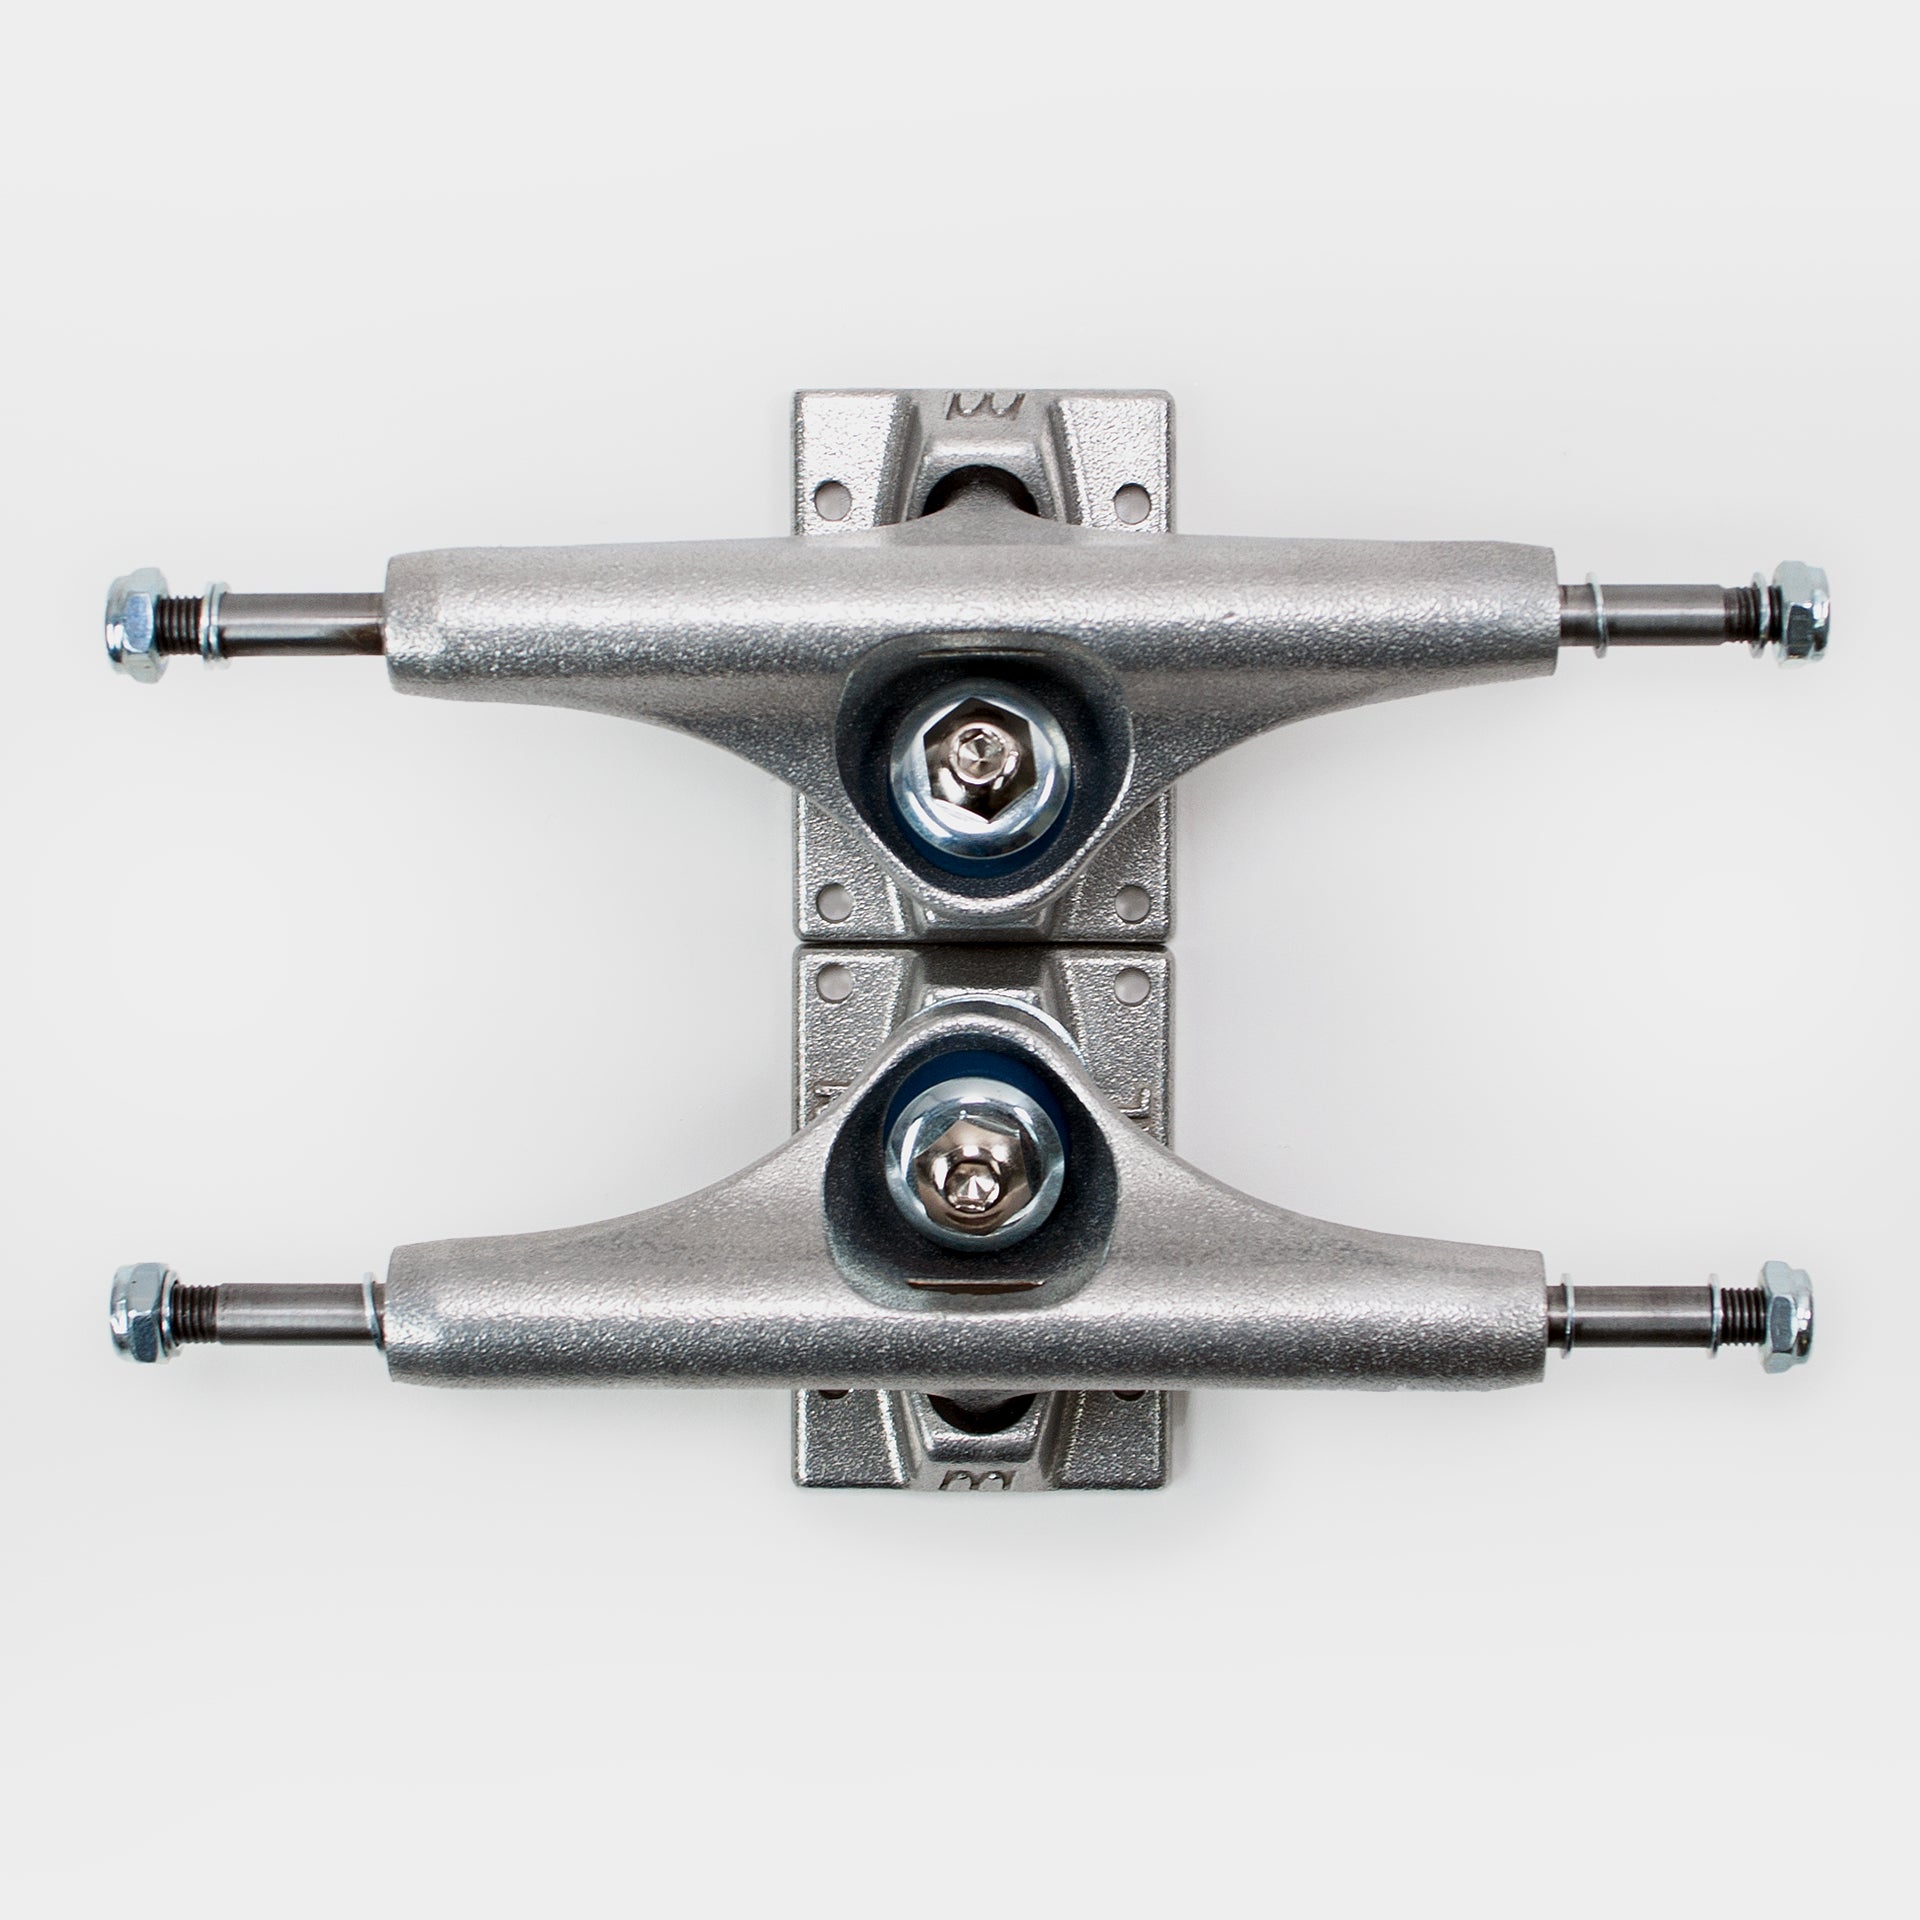 Royal FC Inverted Kingpin Raw Truck 159 (8.75") - Silver - (Sold as a pair) - Prime Delux Store